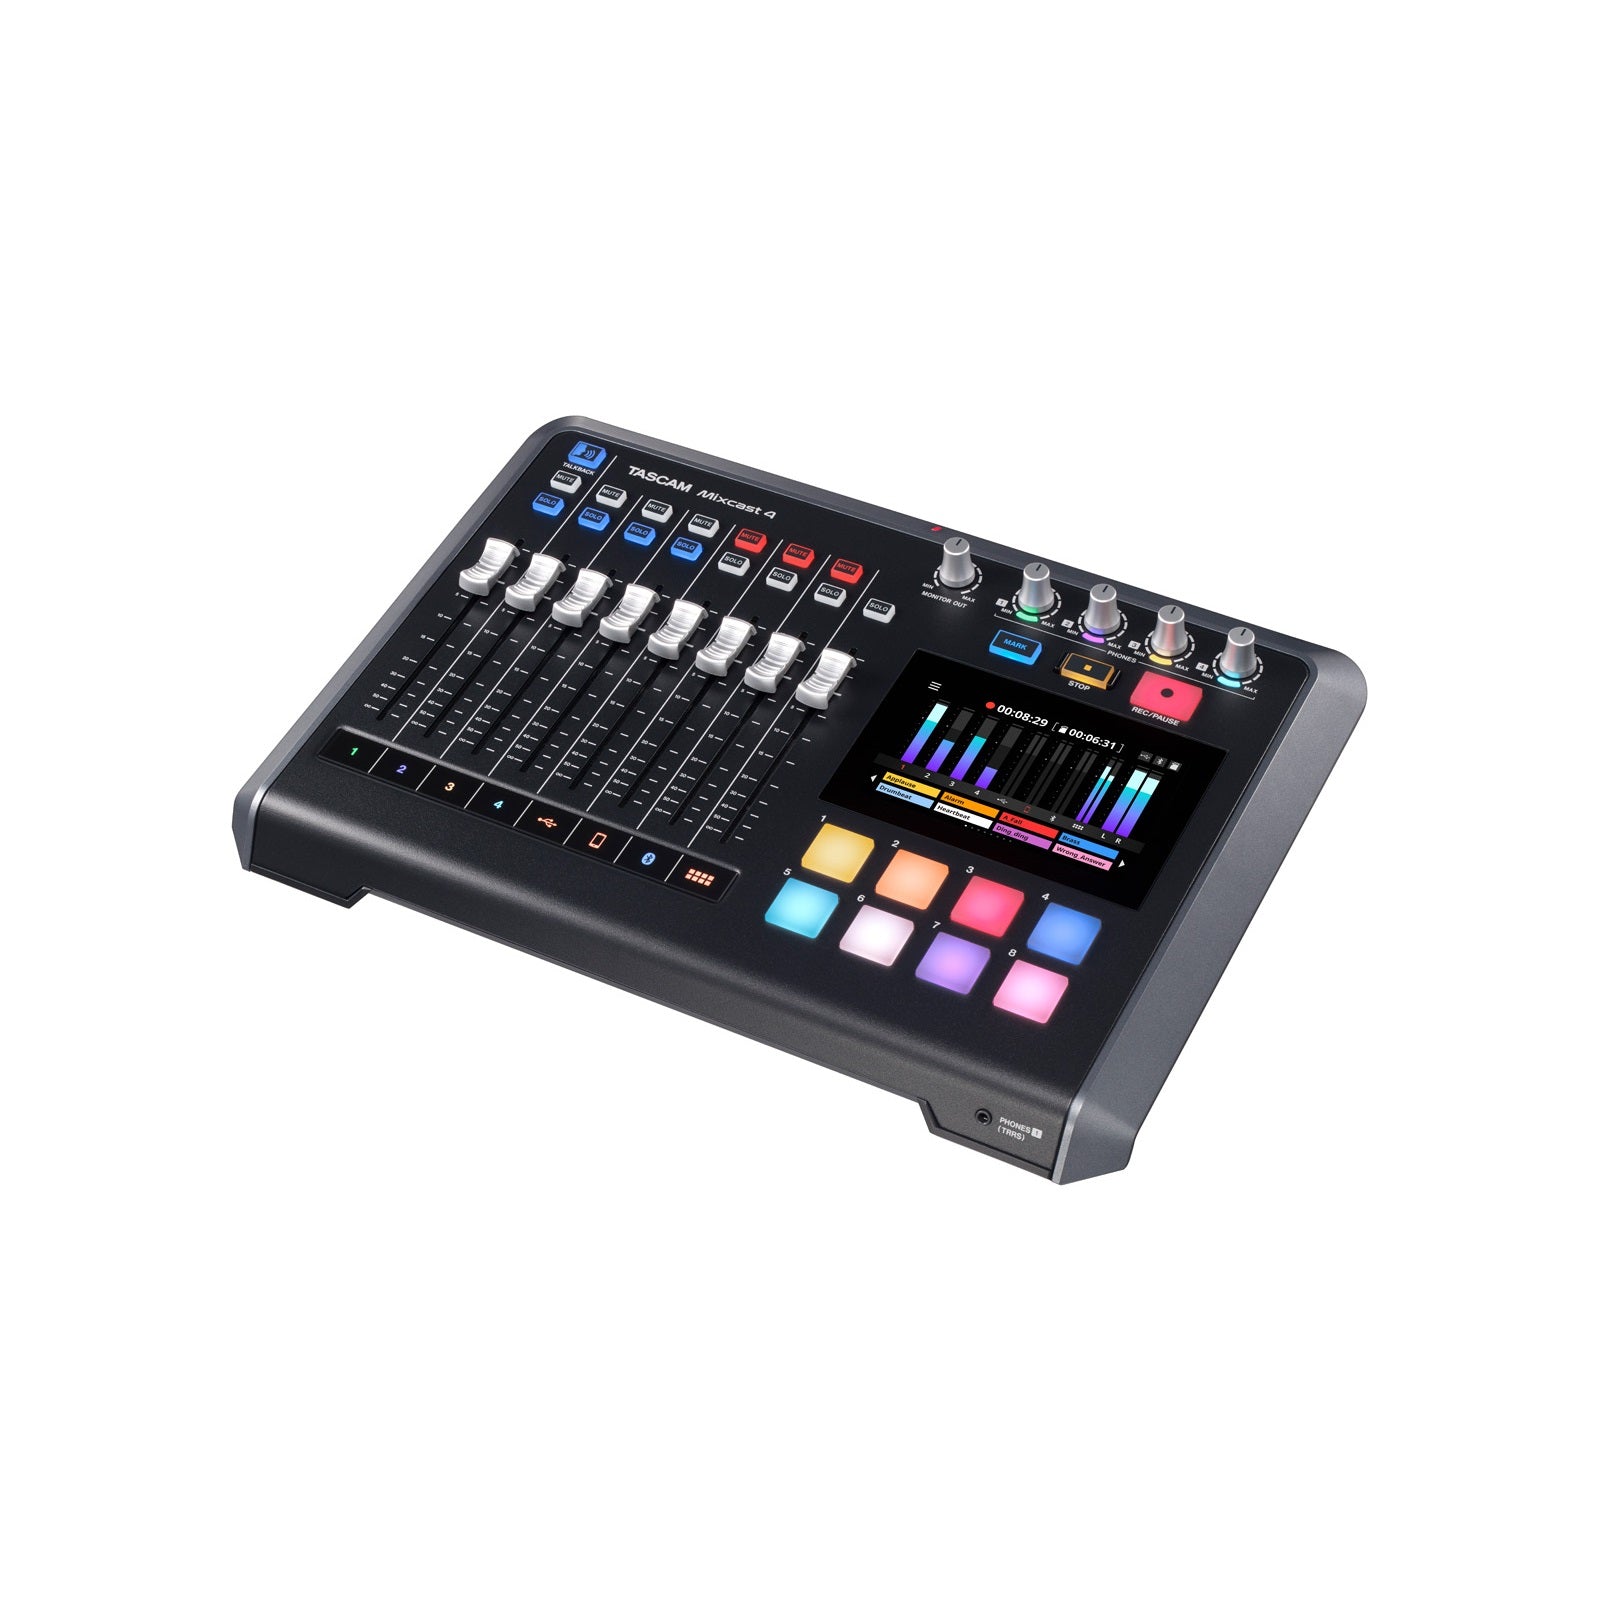 Image 5 of Tascam Mixcast 4 Podcast Station / Recorder / USB Audio Interface - SKU# MIXCAST4 : Product Type Recording Equipment & Accessories : Elderly Instruments